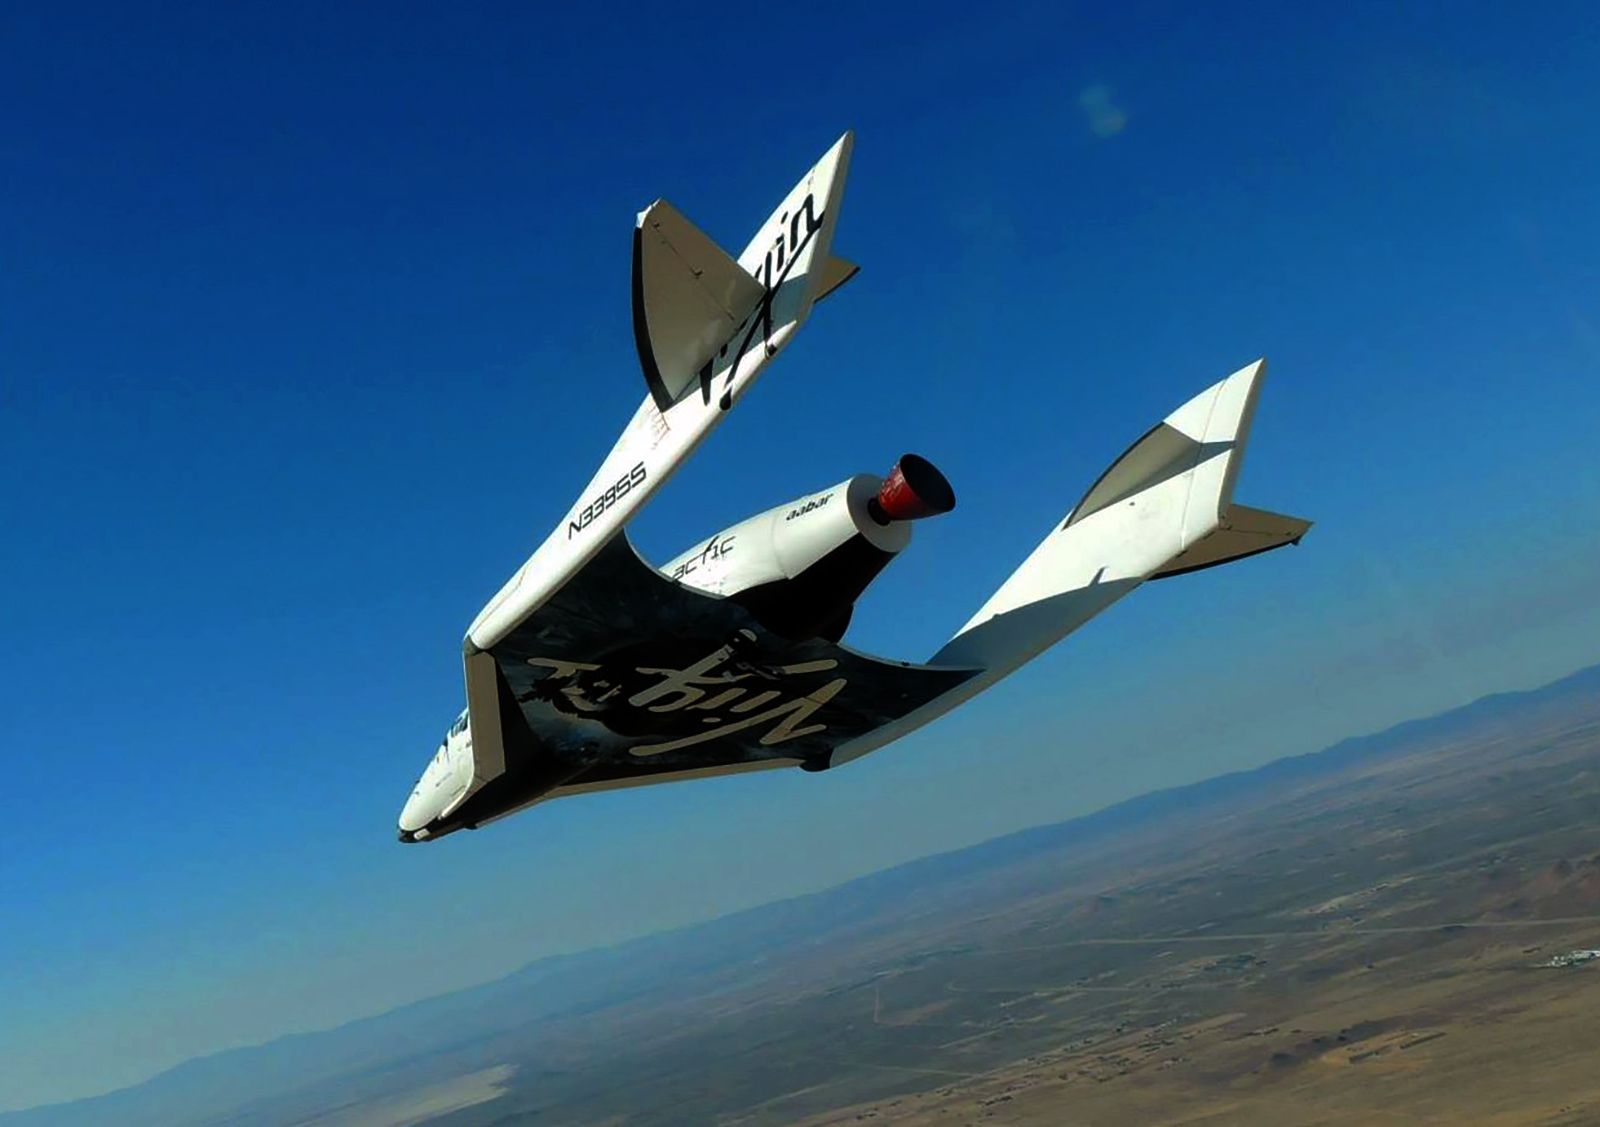 virgin galactic spaceshiptwo crashes in desert during test at least one dead image 1